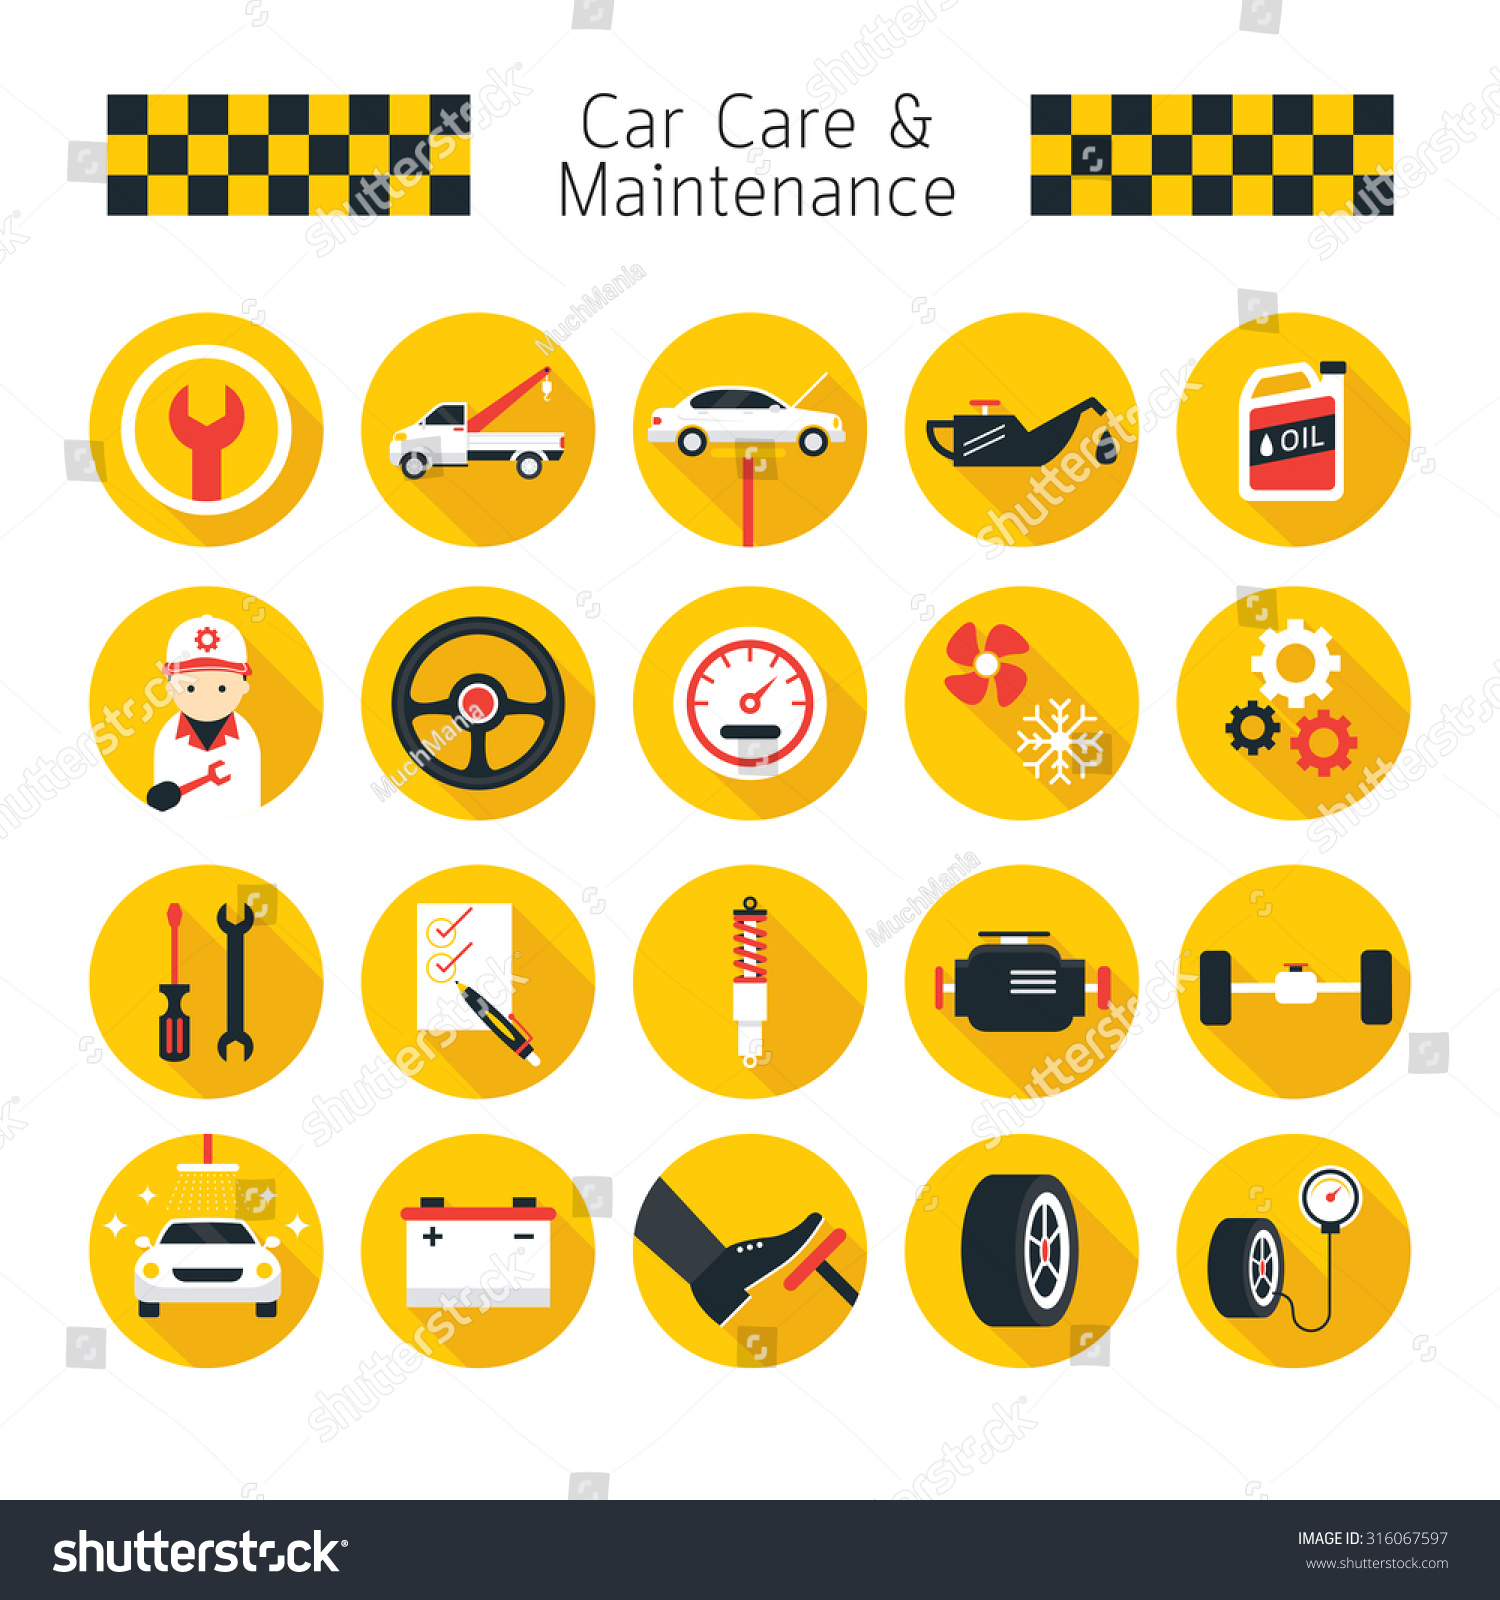 Car Care and Maintenance Objects icons Set, Flat Design, Vehicle 